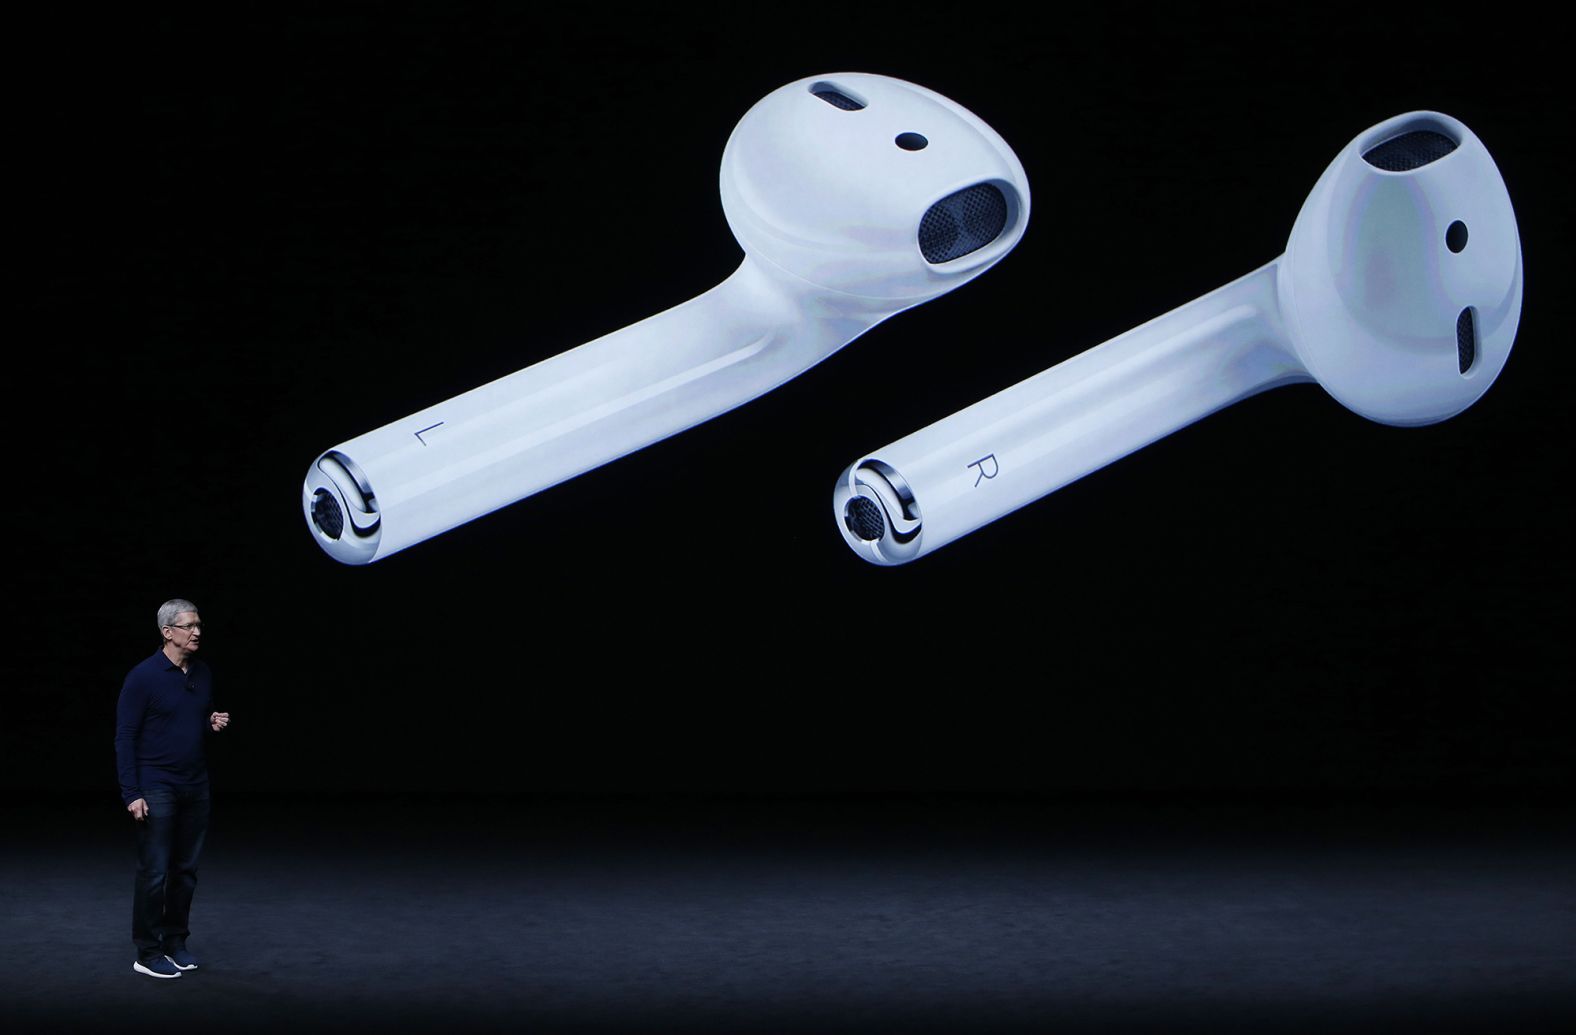 Cook speaks during the launch of Apple's AirPods in September 2016.